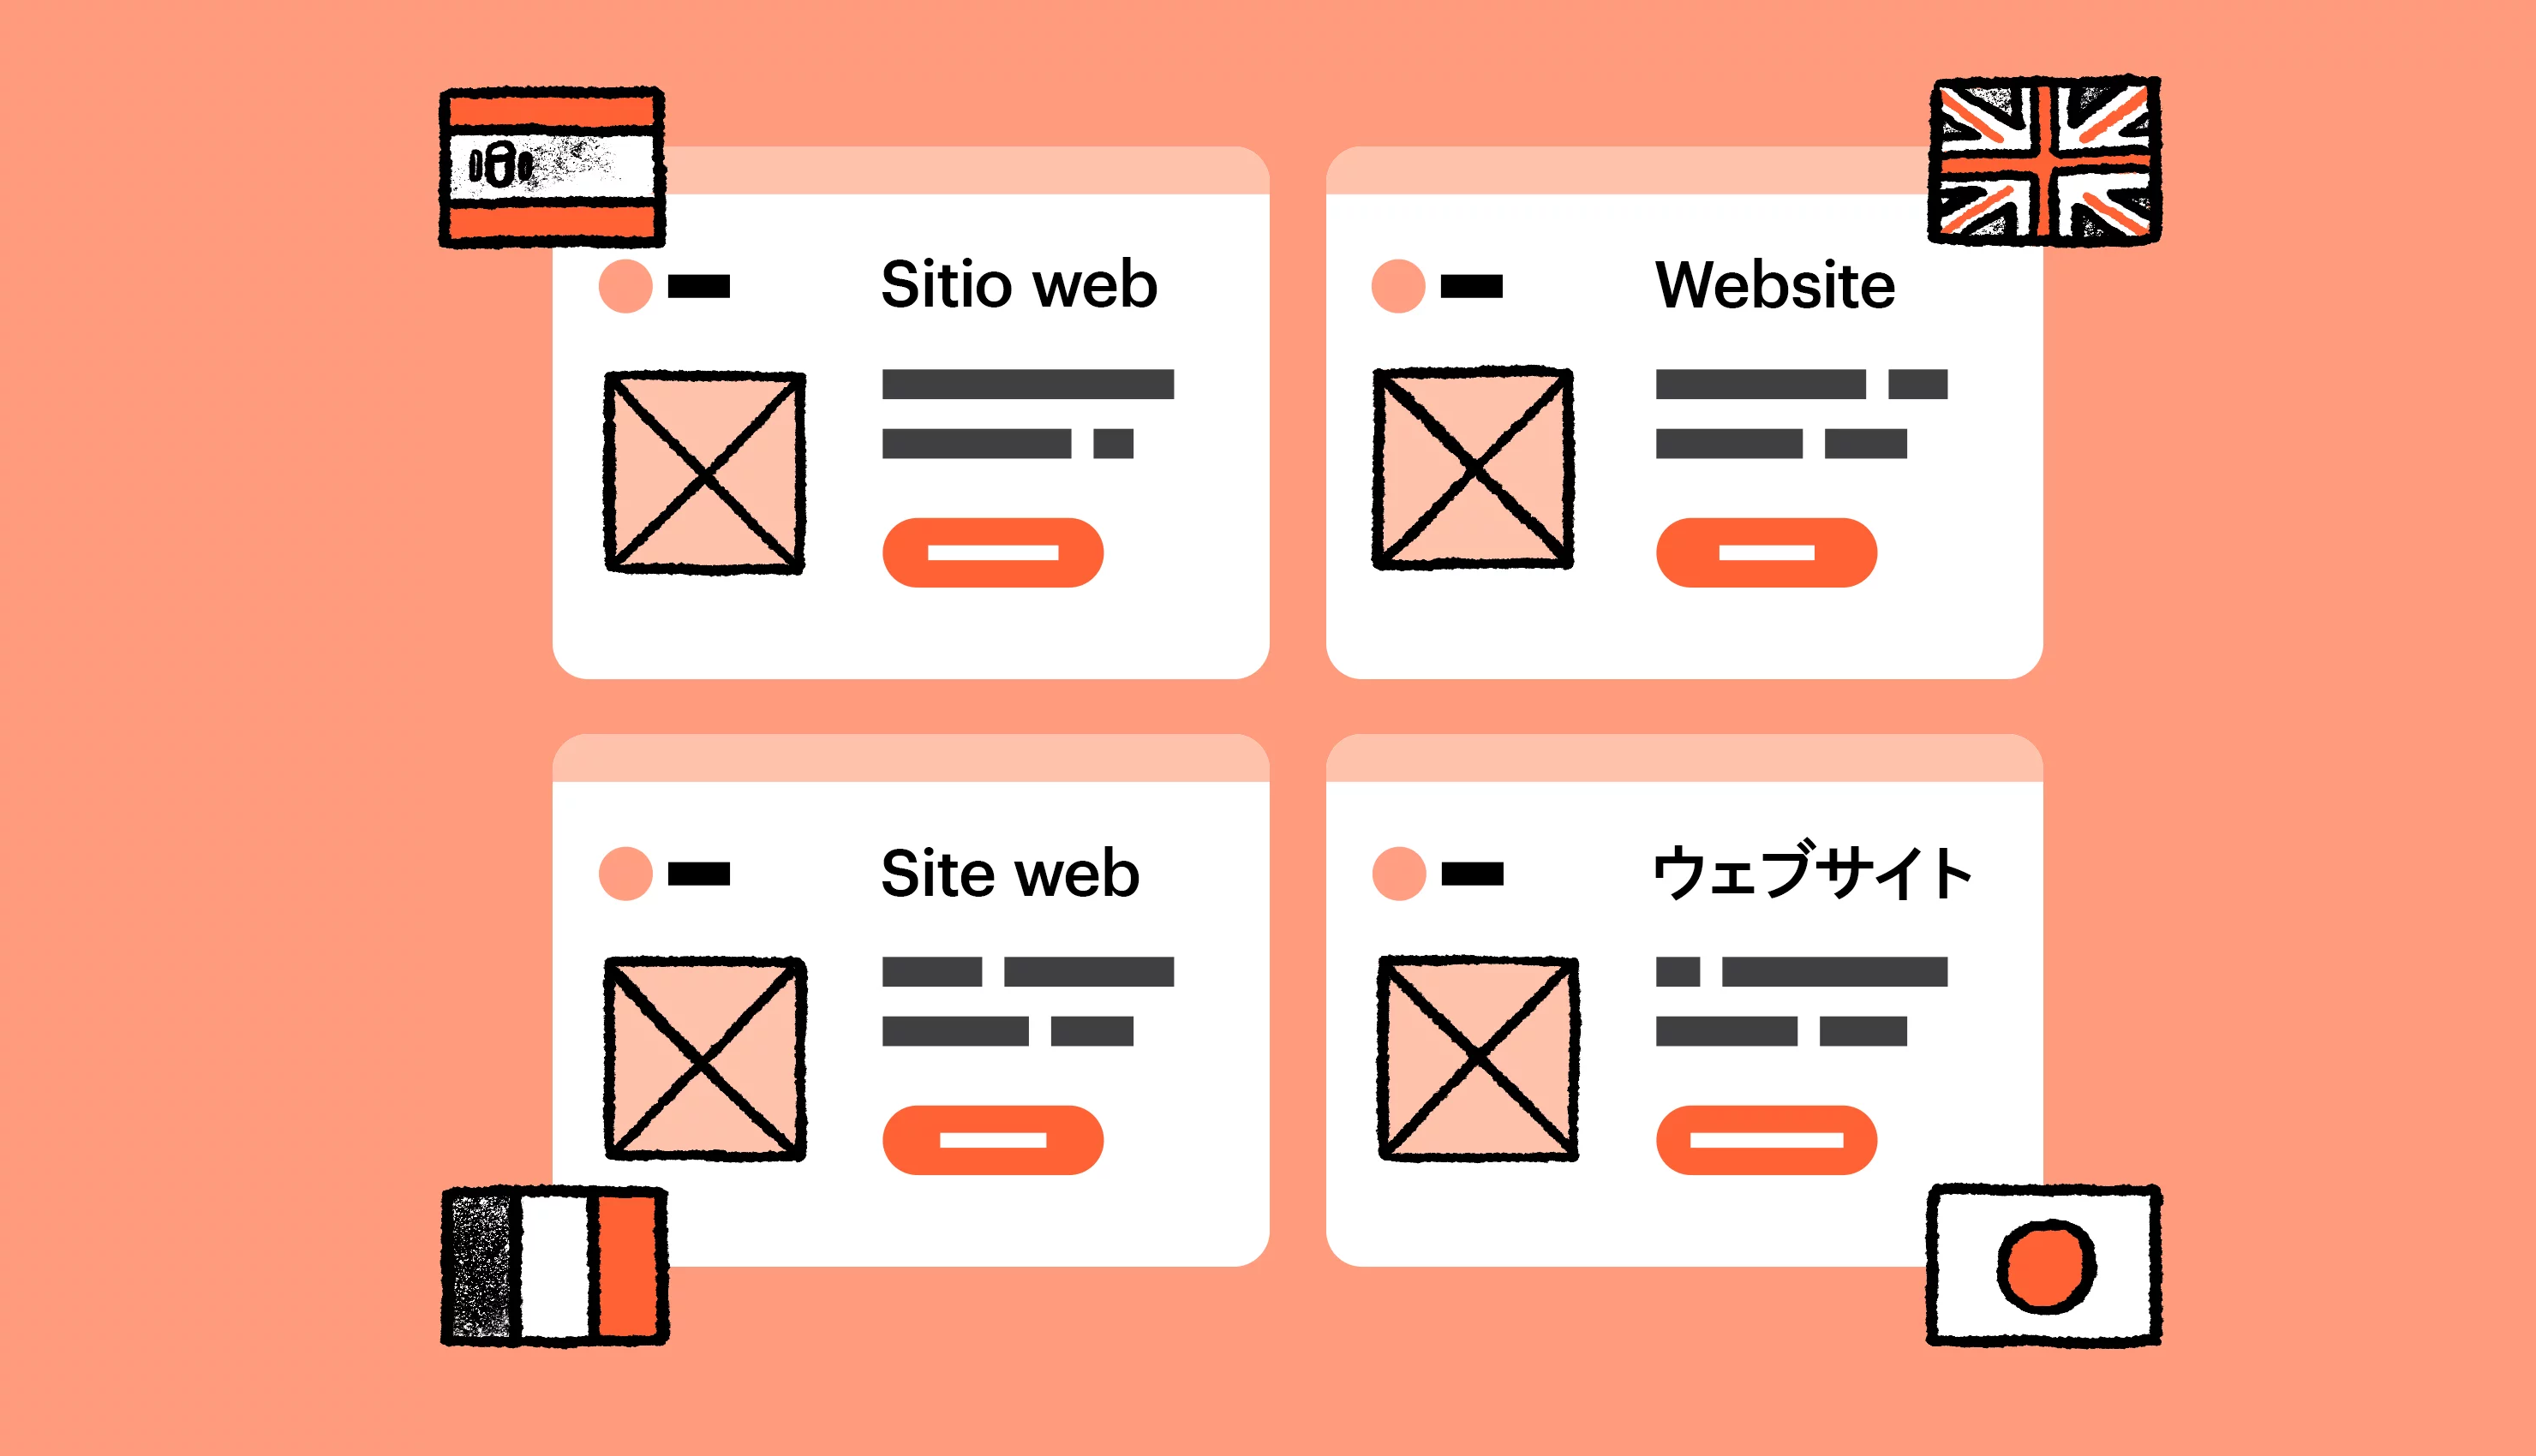 How to conduct website localization in 7 steps